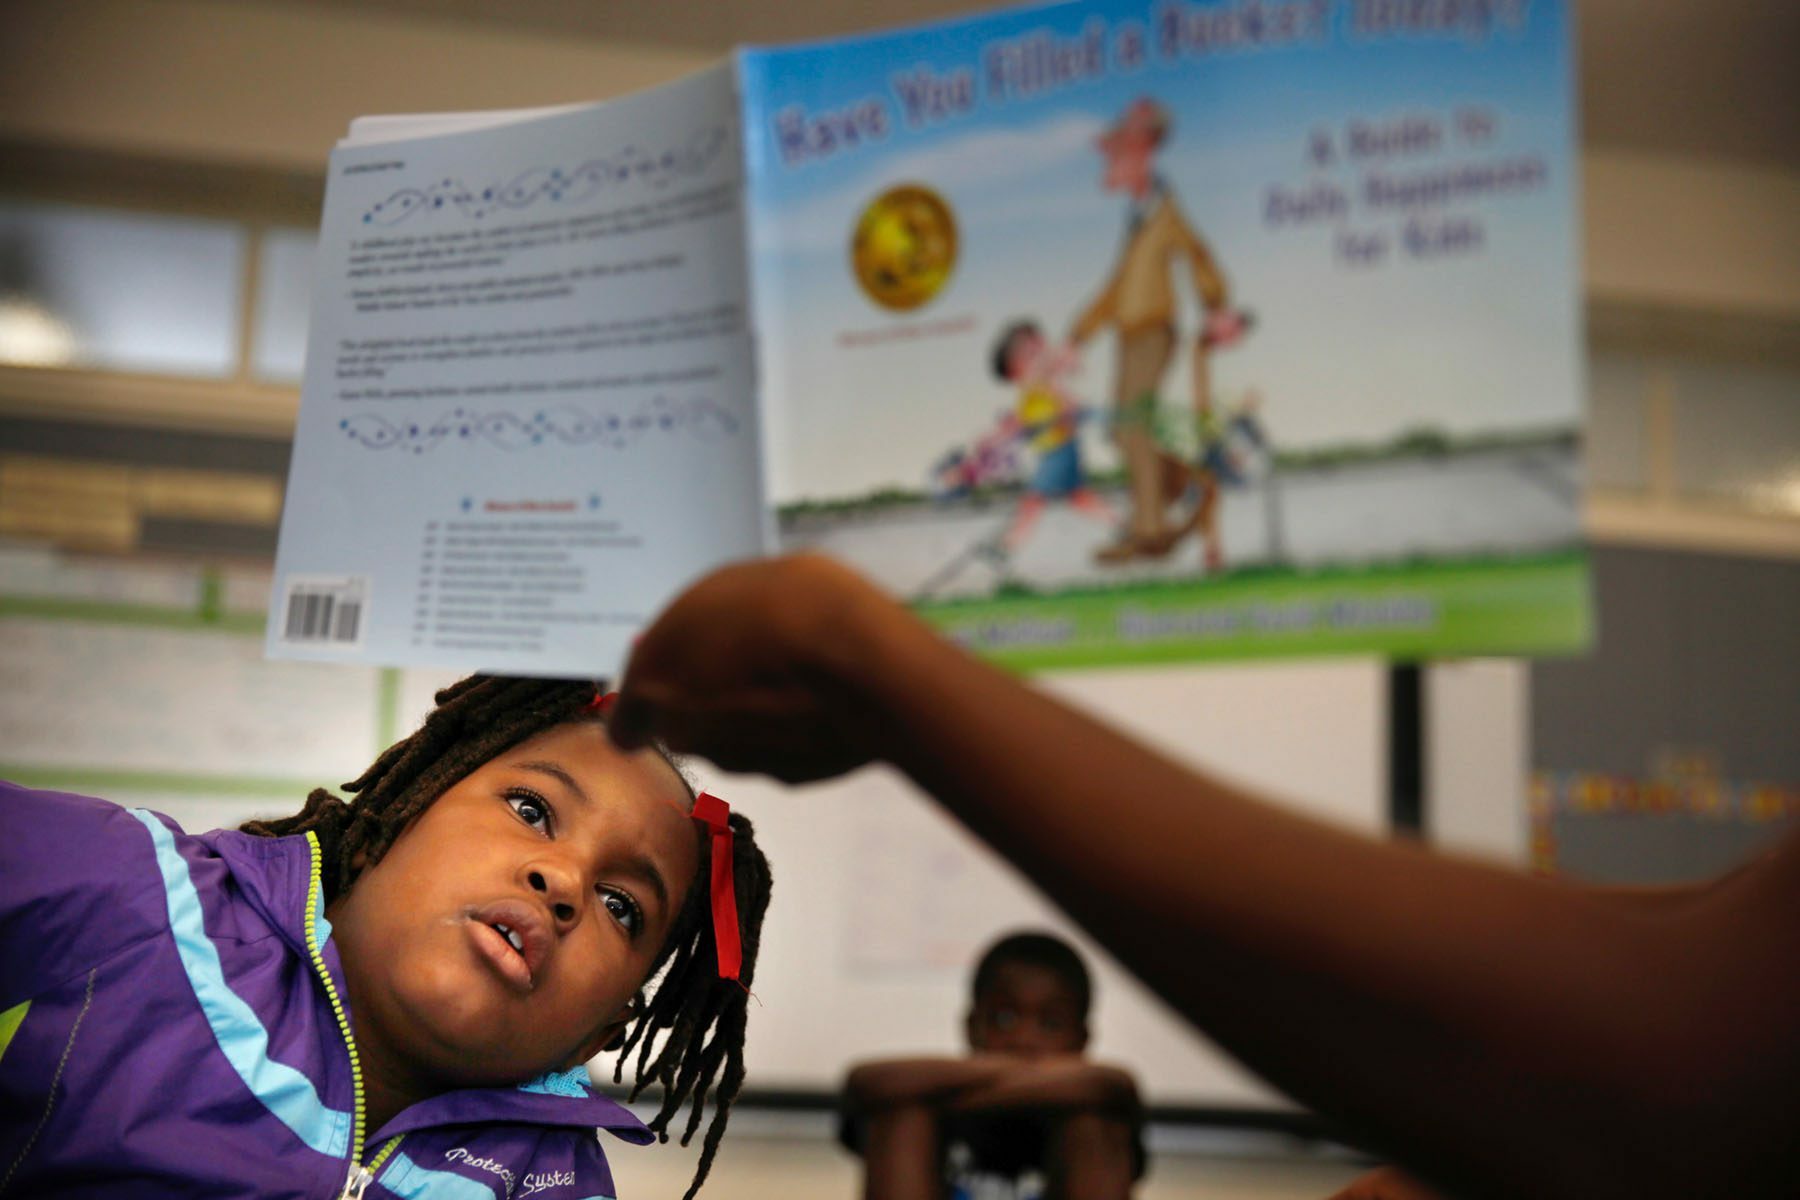 A student listens to a story being read by a teacher at the Children's Defense Fund's Freedom School Program site at West Oakland Middle School.